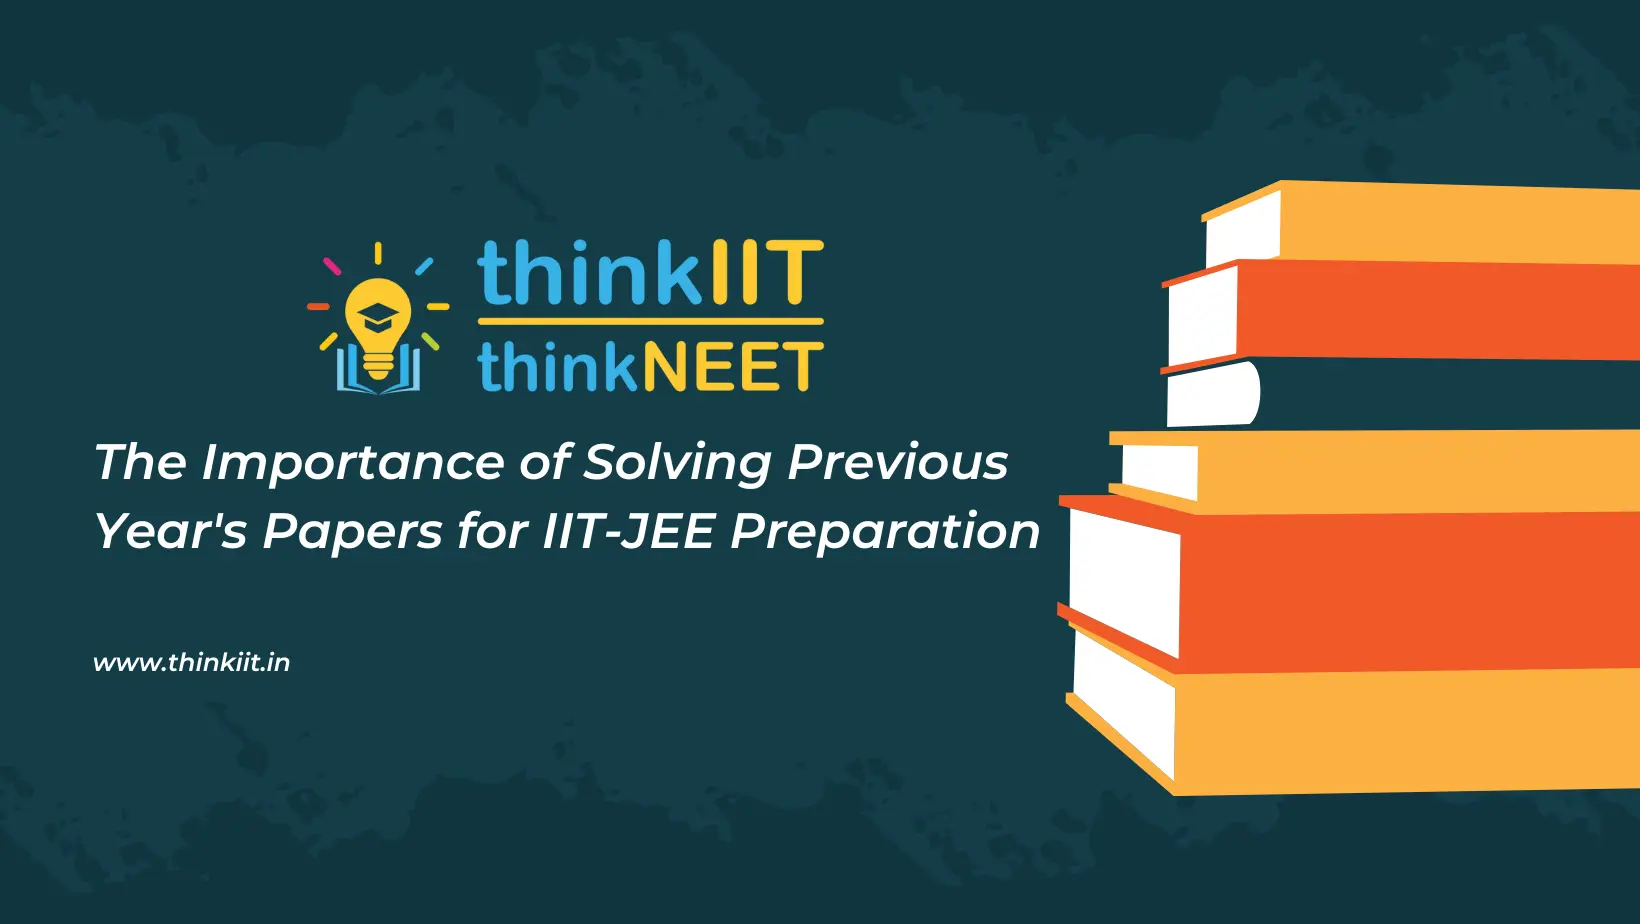 Solving Previous Year's Papers for IIT-JEE